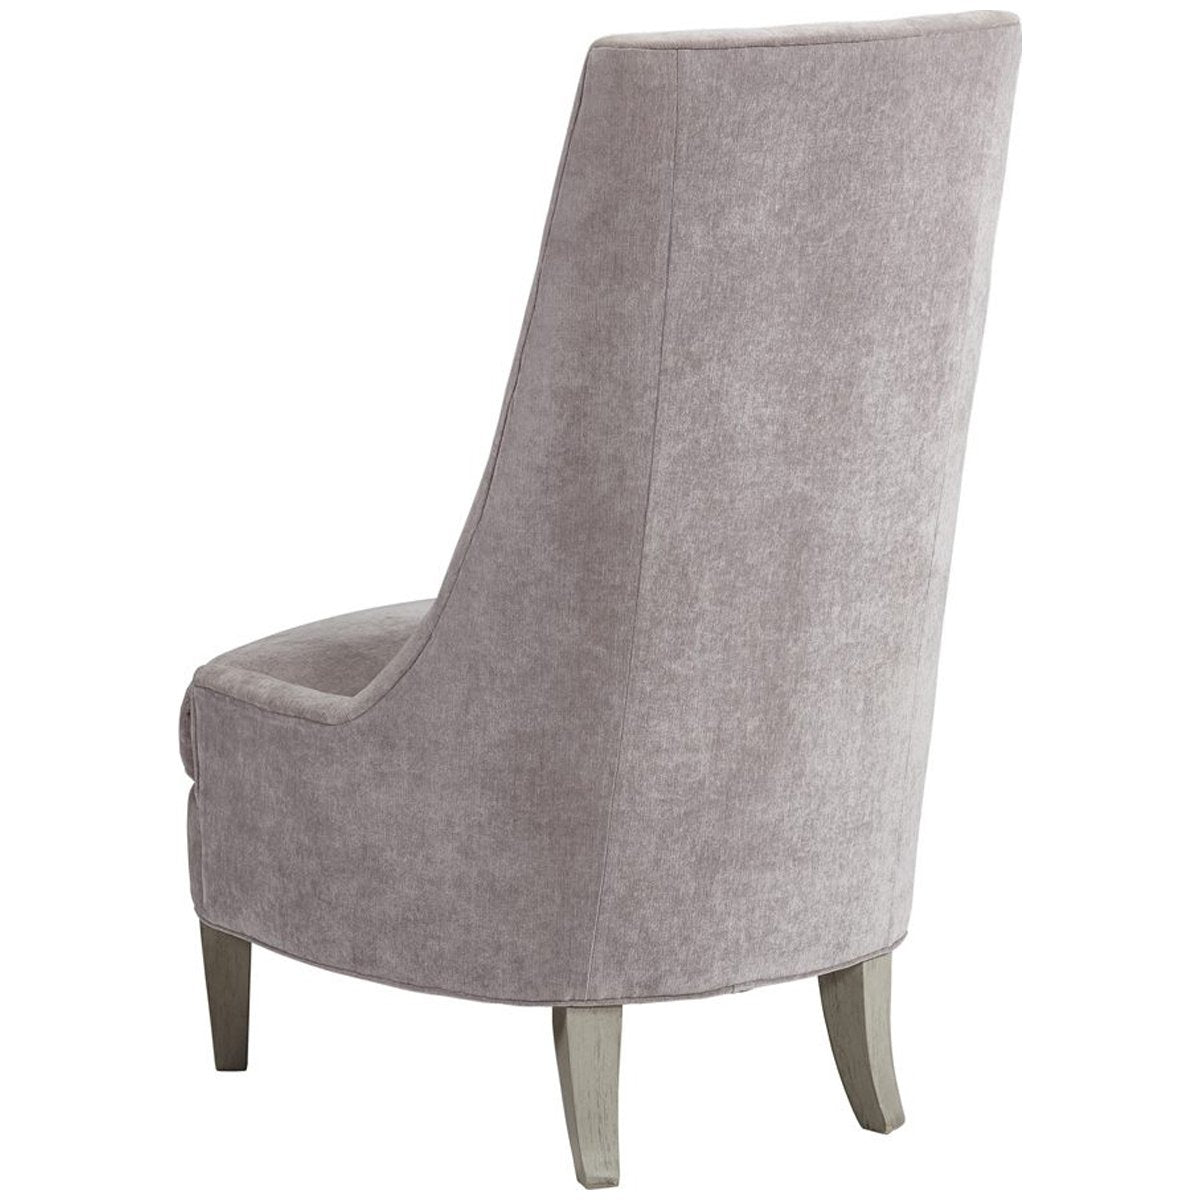 Lillian August Isabelle Chair